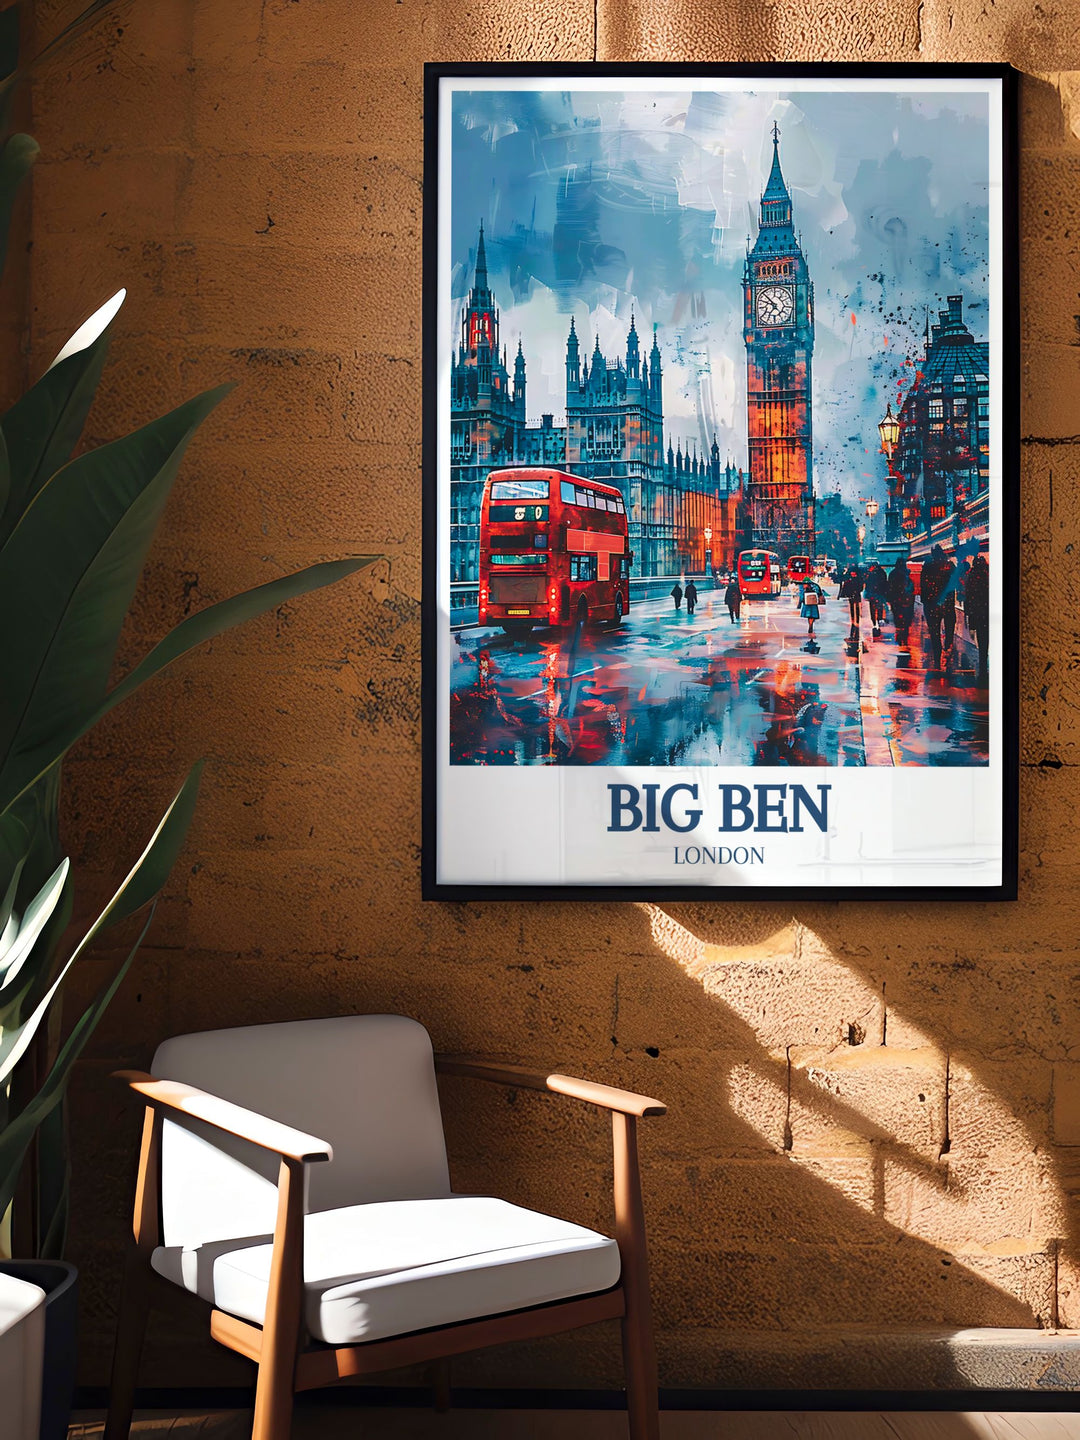 Stunning London print highlighting the intricate architecture of Big Ben and the Westminster Bridge alongside the tranquil River Thames, ideal for history enthusiasts and travel art lovers.